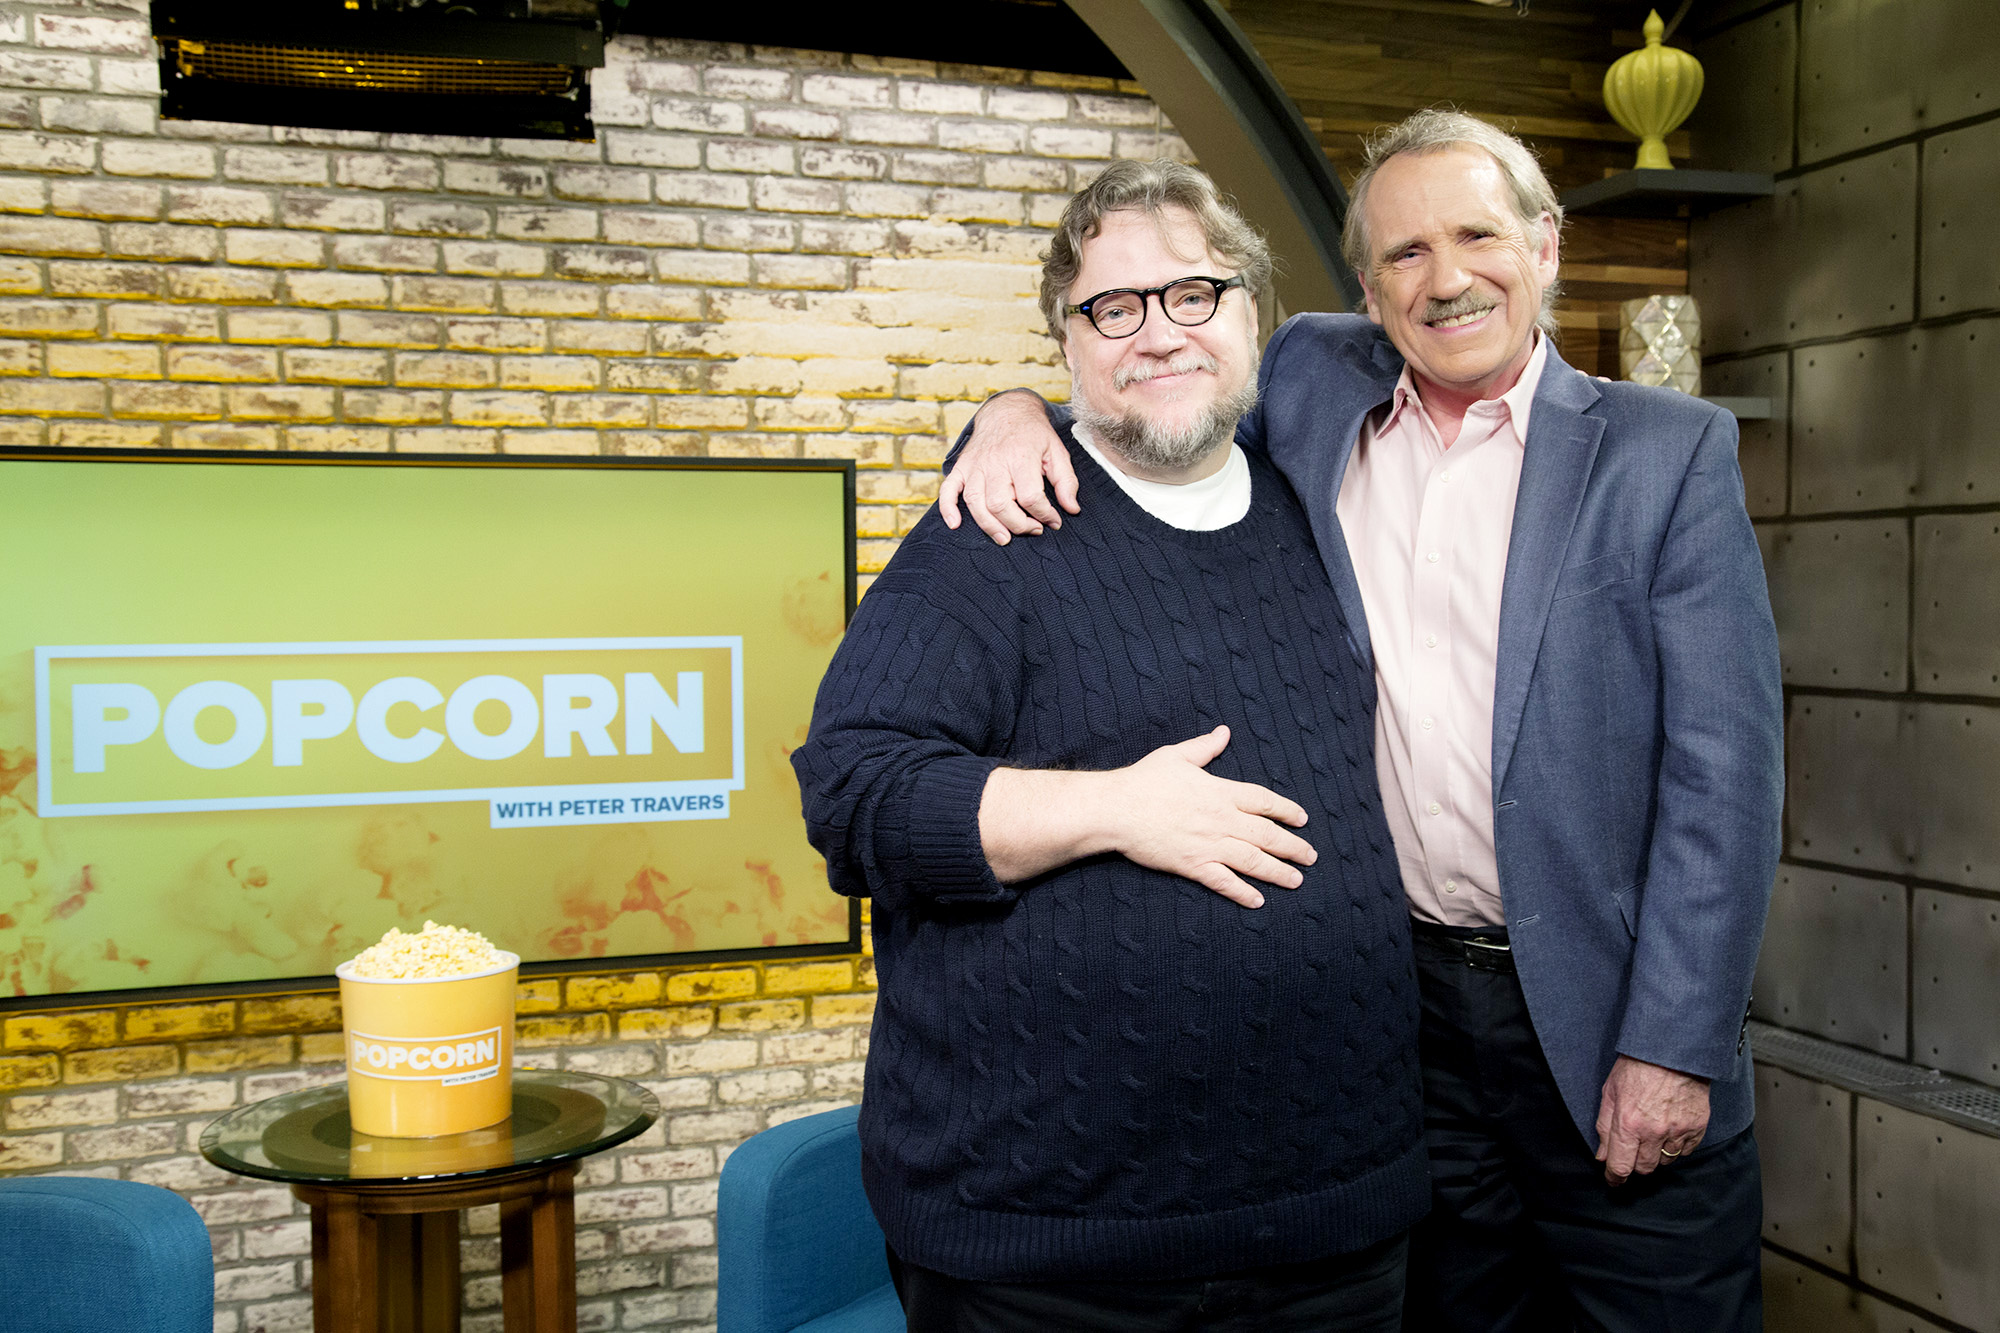 PHOTO: Guillermo del Toro appears on "Popcorn with Peter Travers" at ABC News studios, Dec. 5, 2017, in New York City.